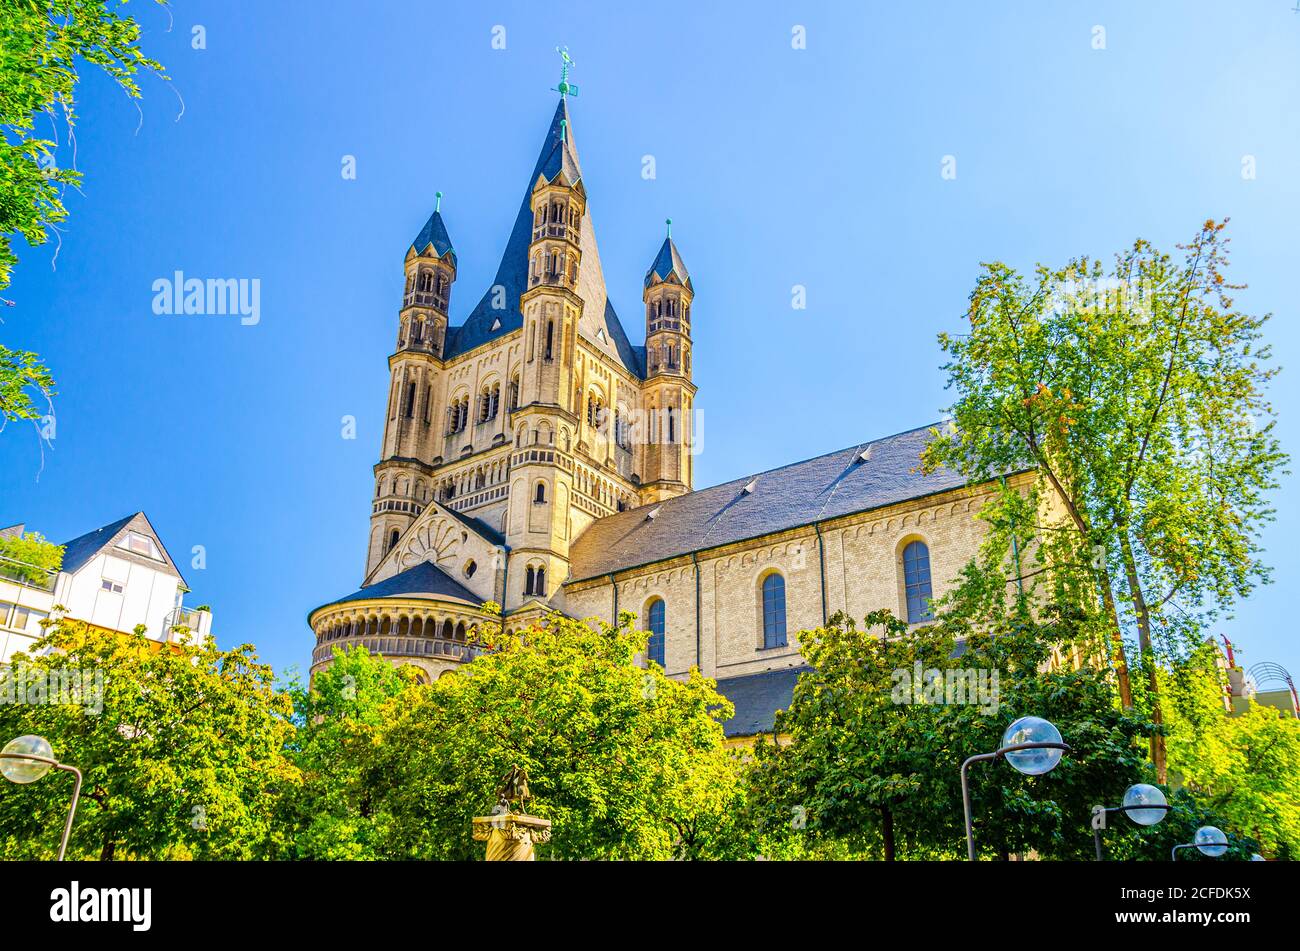 The Great Saint Martin Roman Catholic Church Romanesque architecture style building with spire on tower and green trees crown foreground, blue clear sky in summer day, North Rhine-Westphalia, Germany Stock Photo